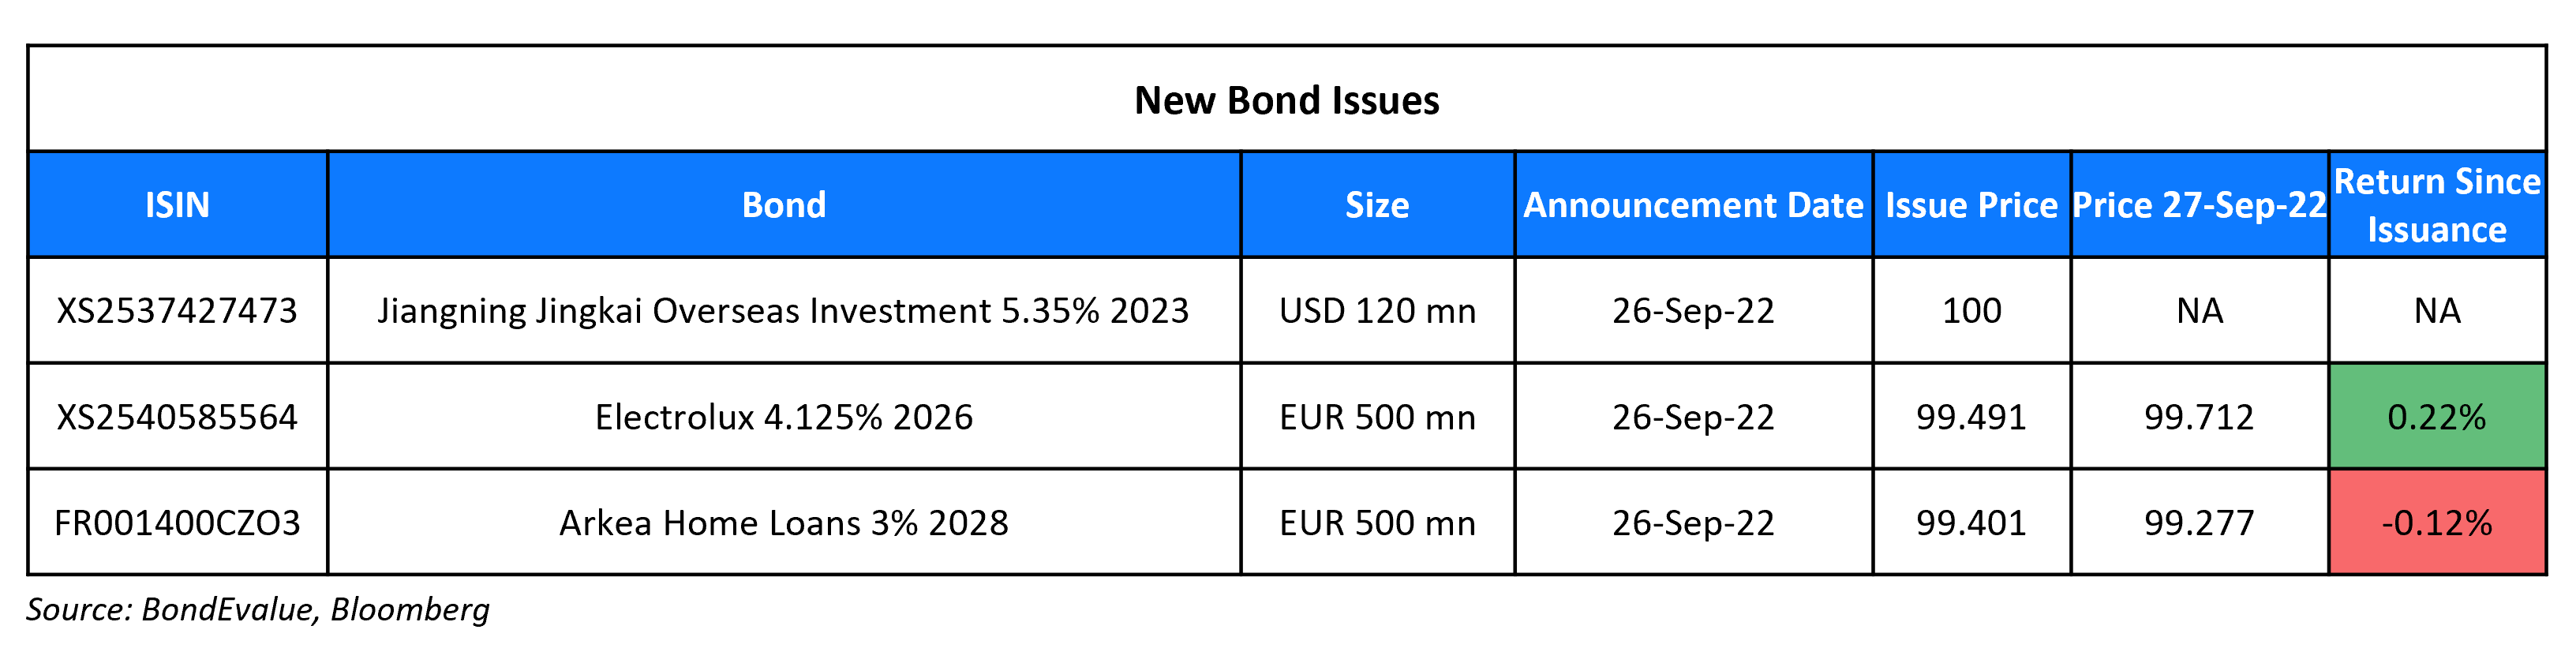 New Bond Issues 27 Sep 22